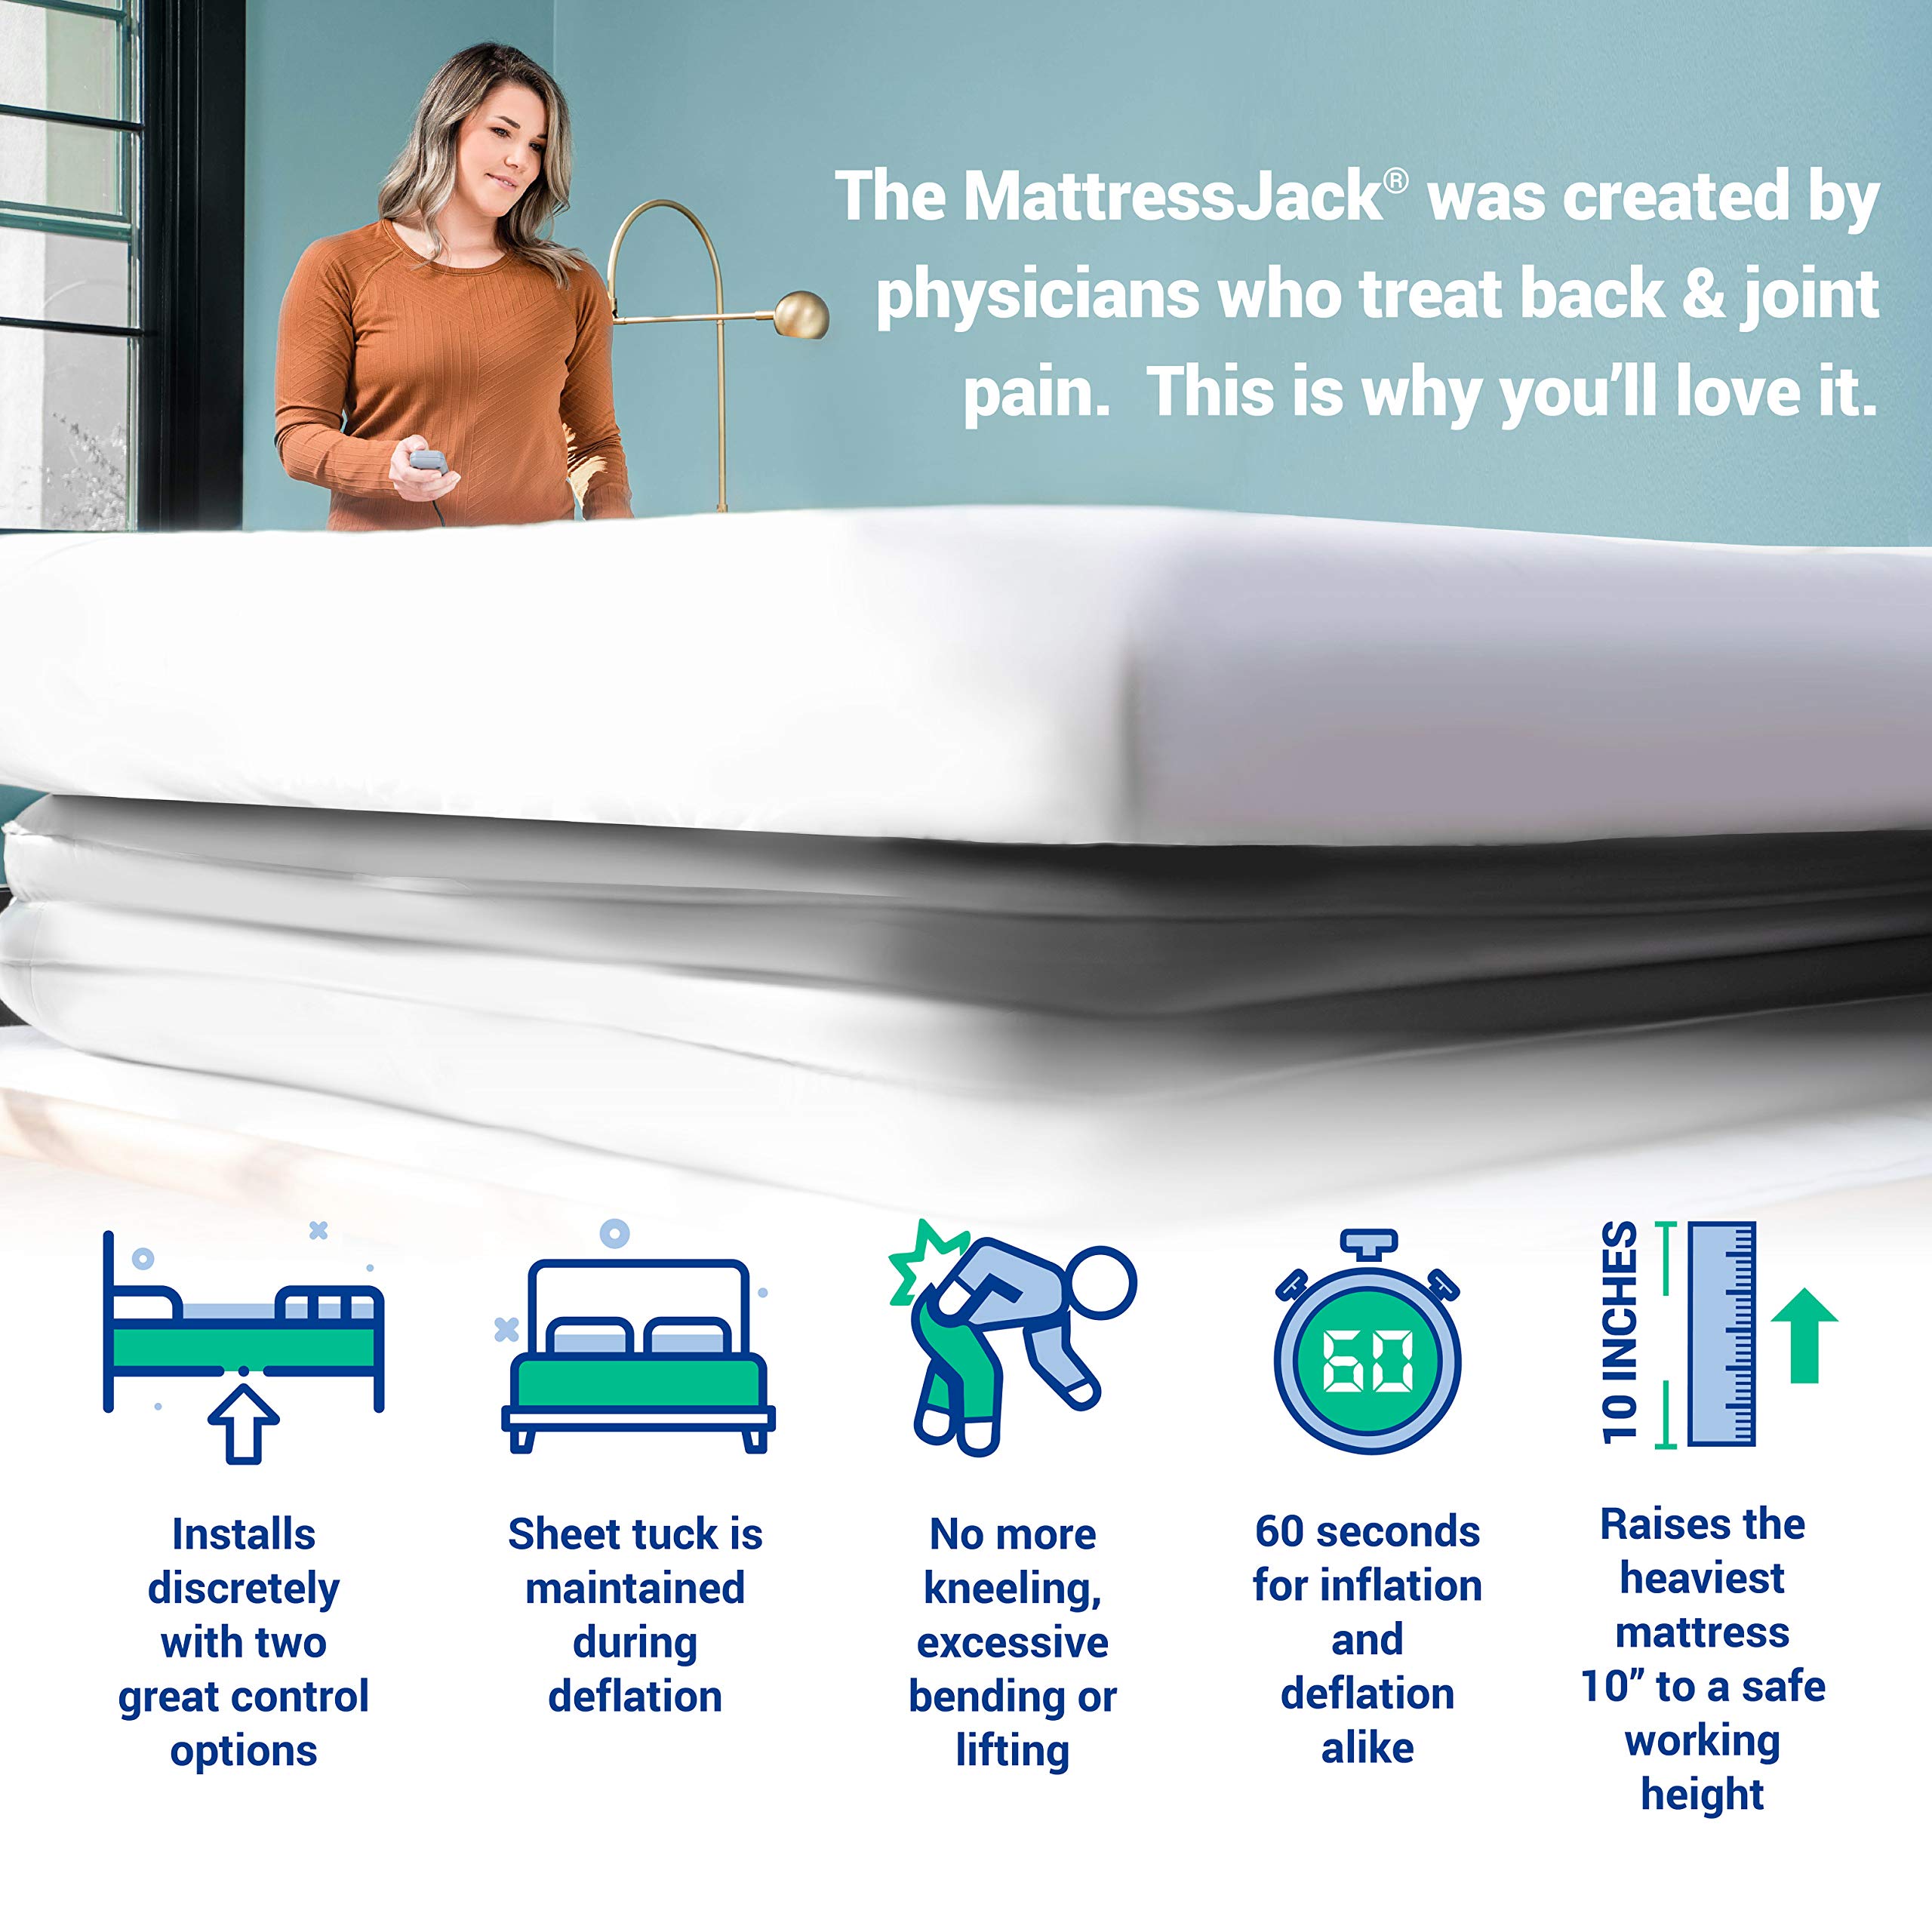 Mattress Jack Mattress Elevator - Easy Use Lifter for Sheet Tucking & Bed Making - Ergonomic Mobility & Daily Living Aid for Elderly, with Inflatable Ring, Air Pump, & Controller, Queen